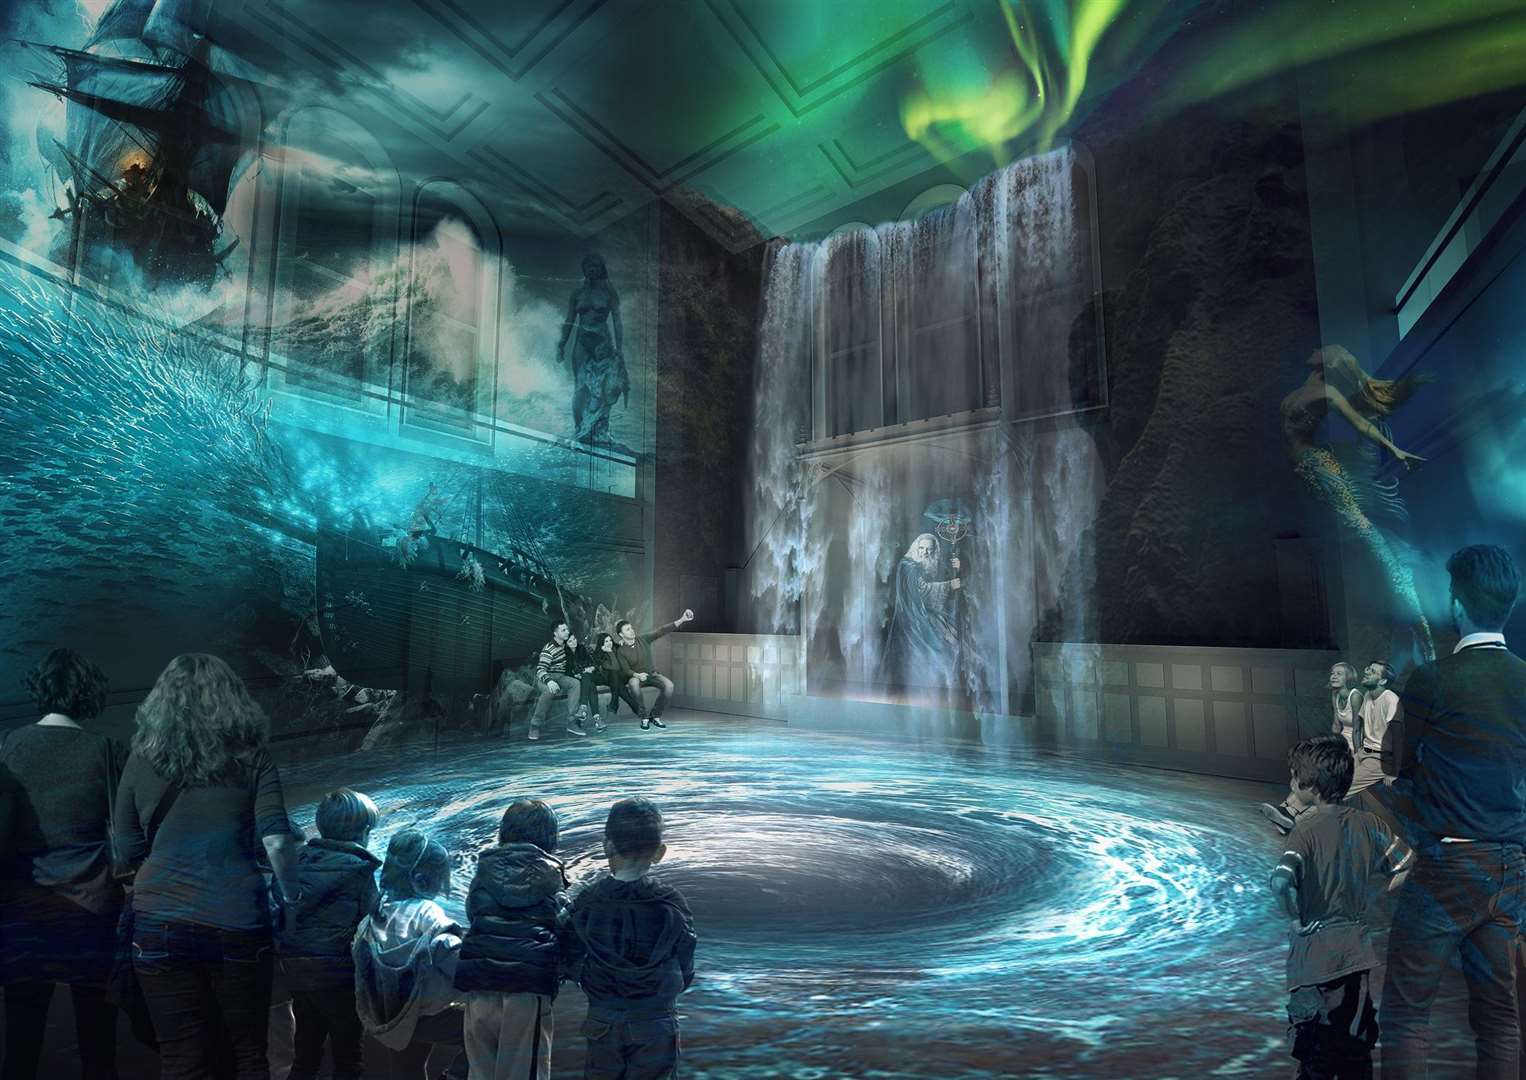 The Spirit Room in the former courtroom brings together all the stories from across the Castle into one grand show with projections creating a fully immersive experience.